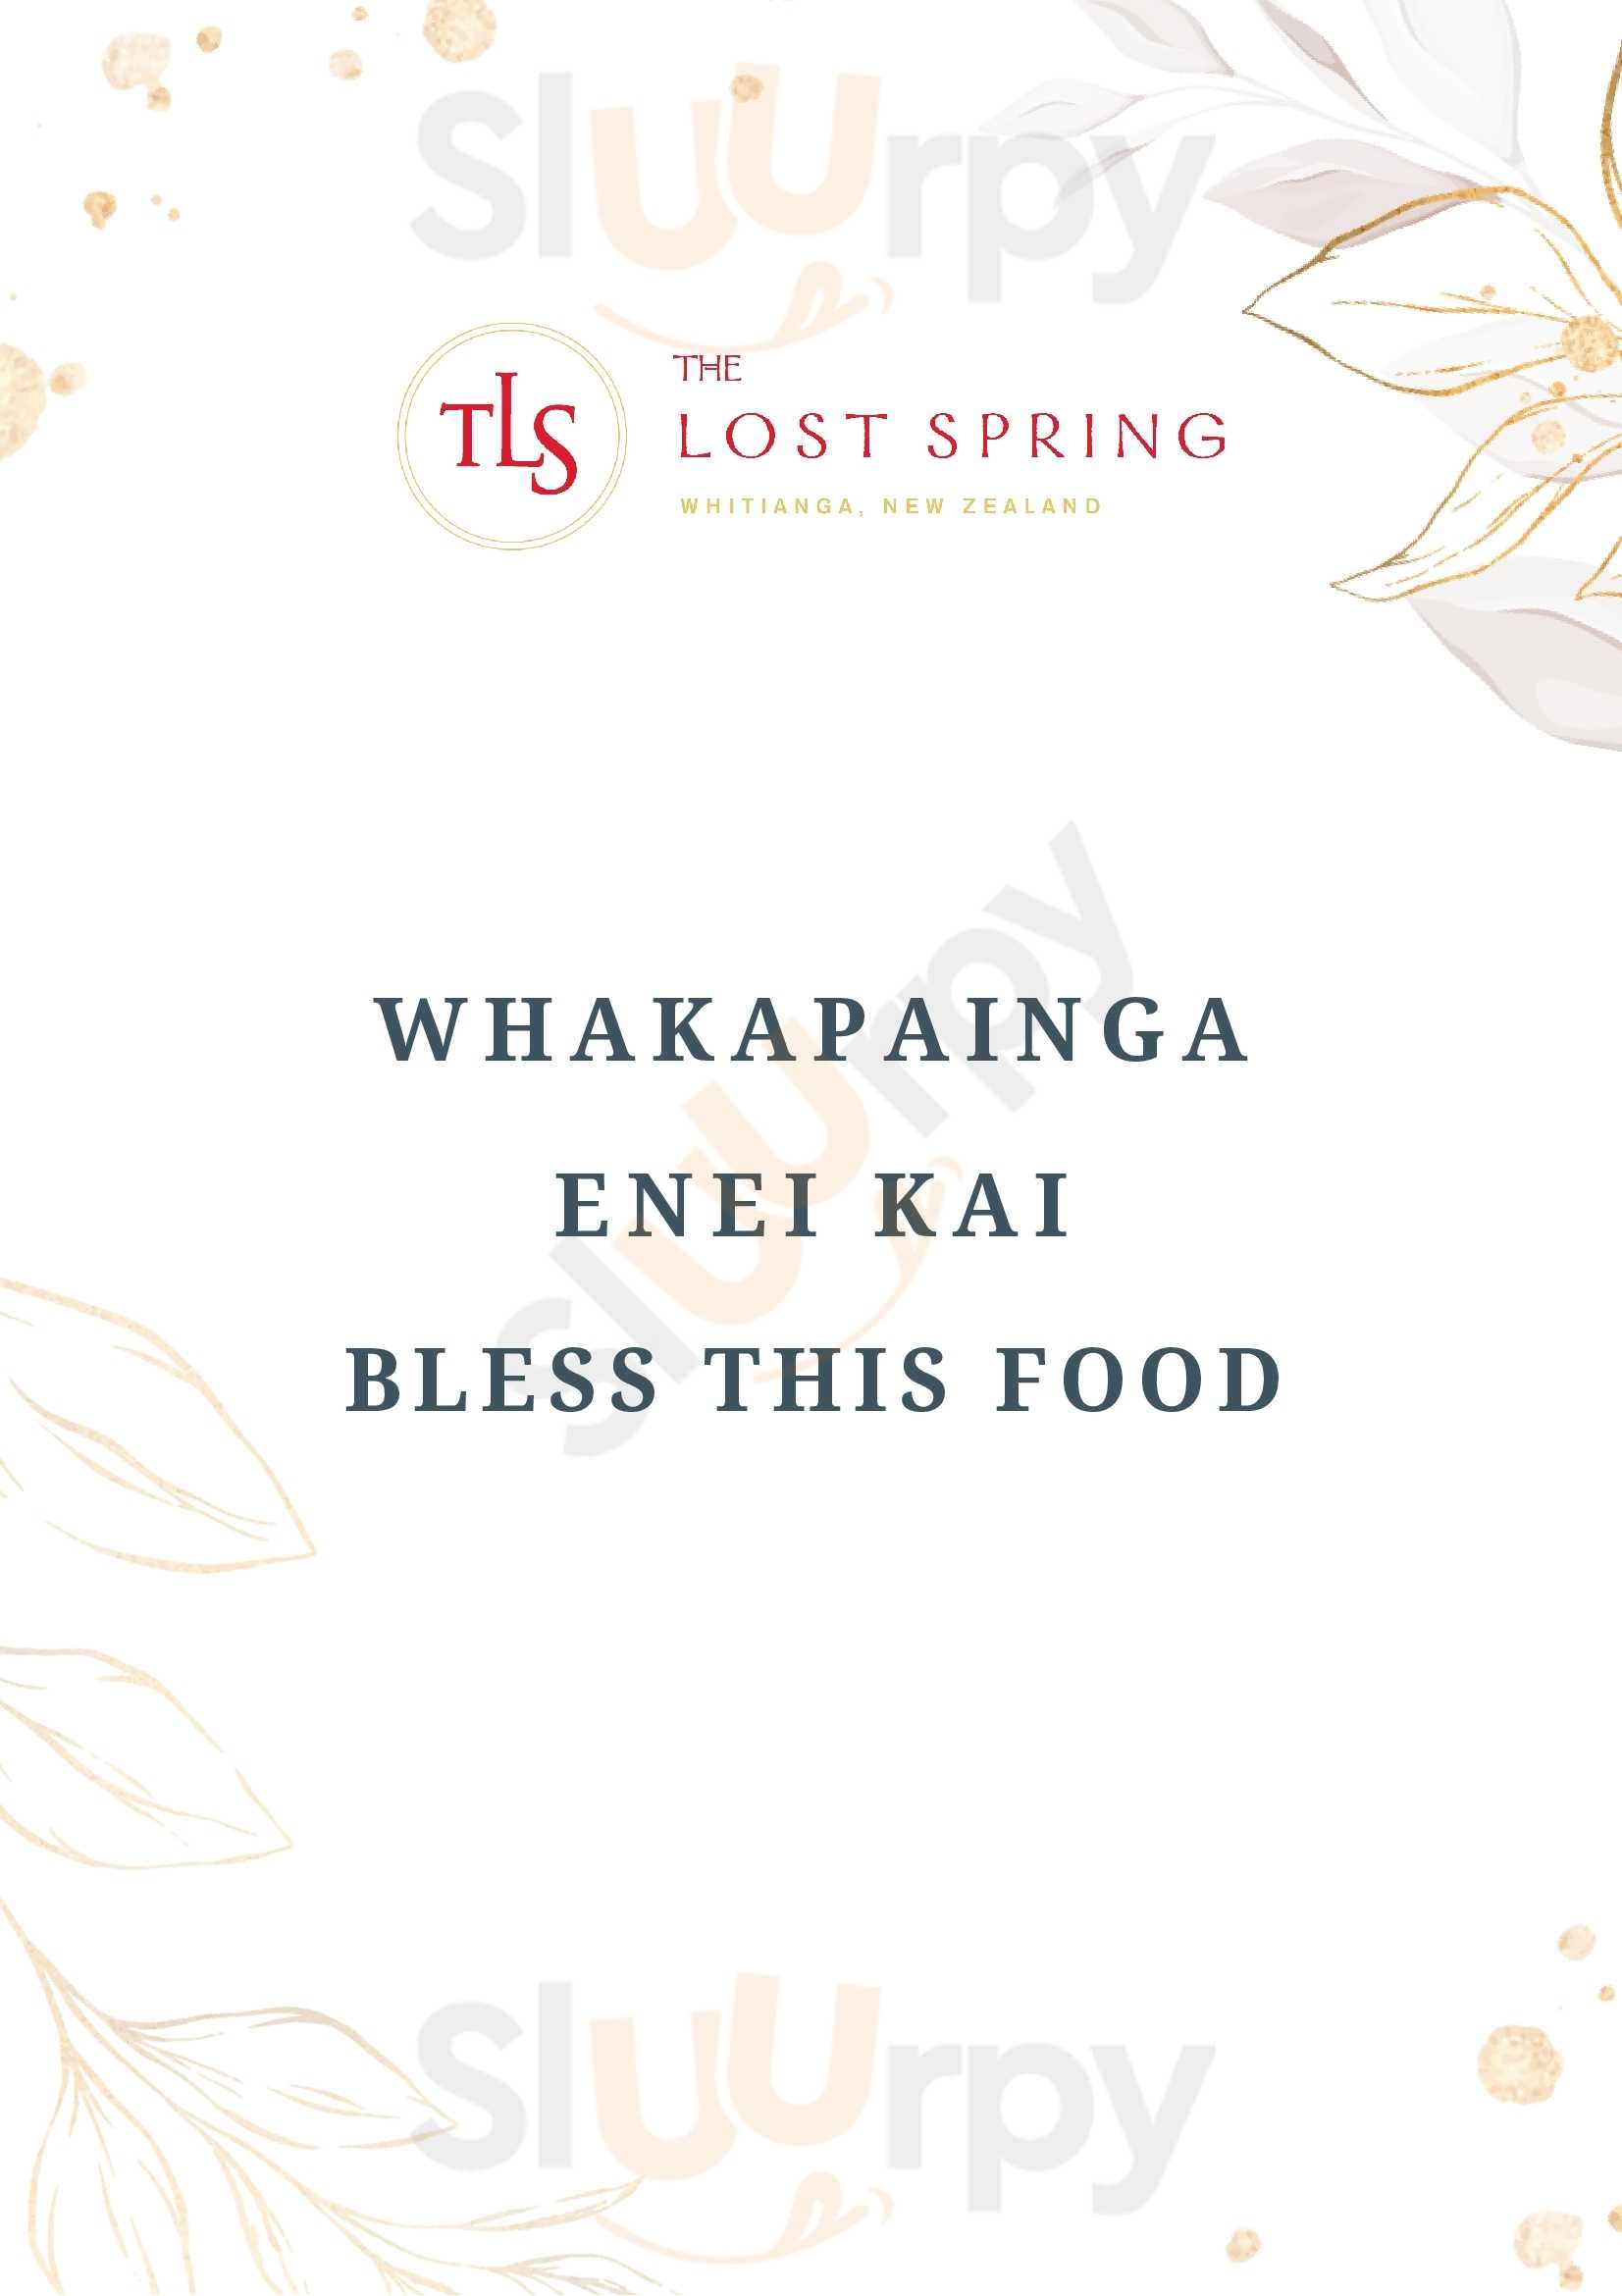 The Lost Spring Cafe And Restaurant Whitianga Menu - 1